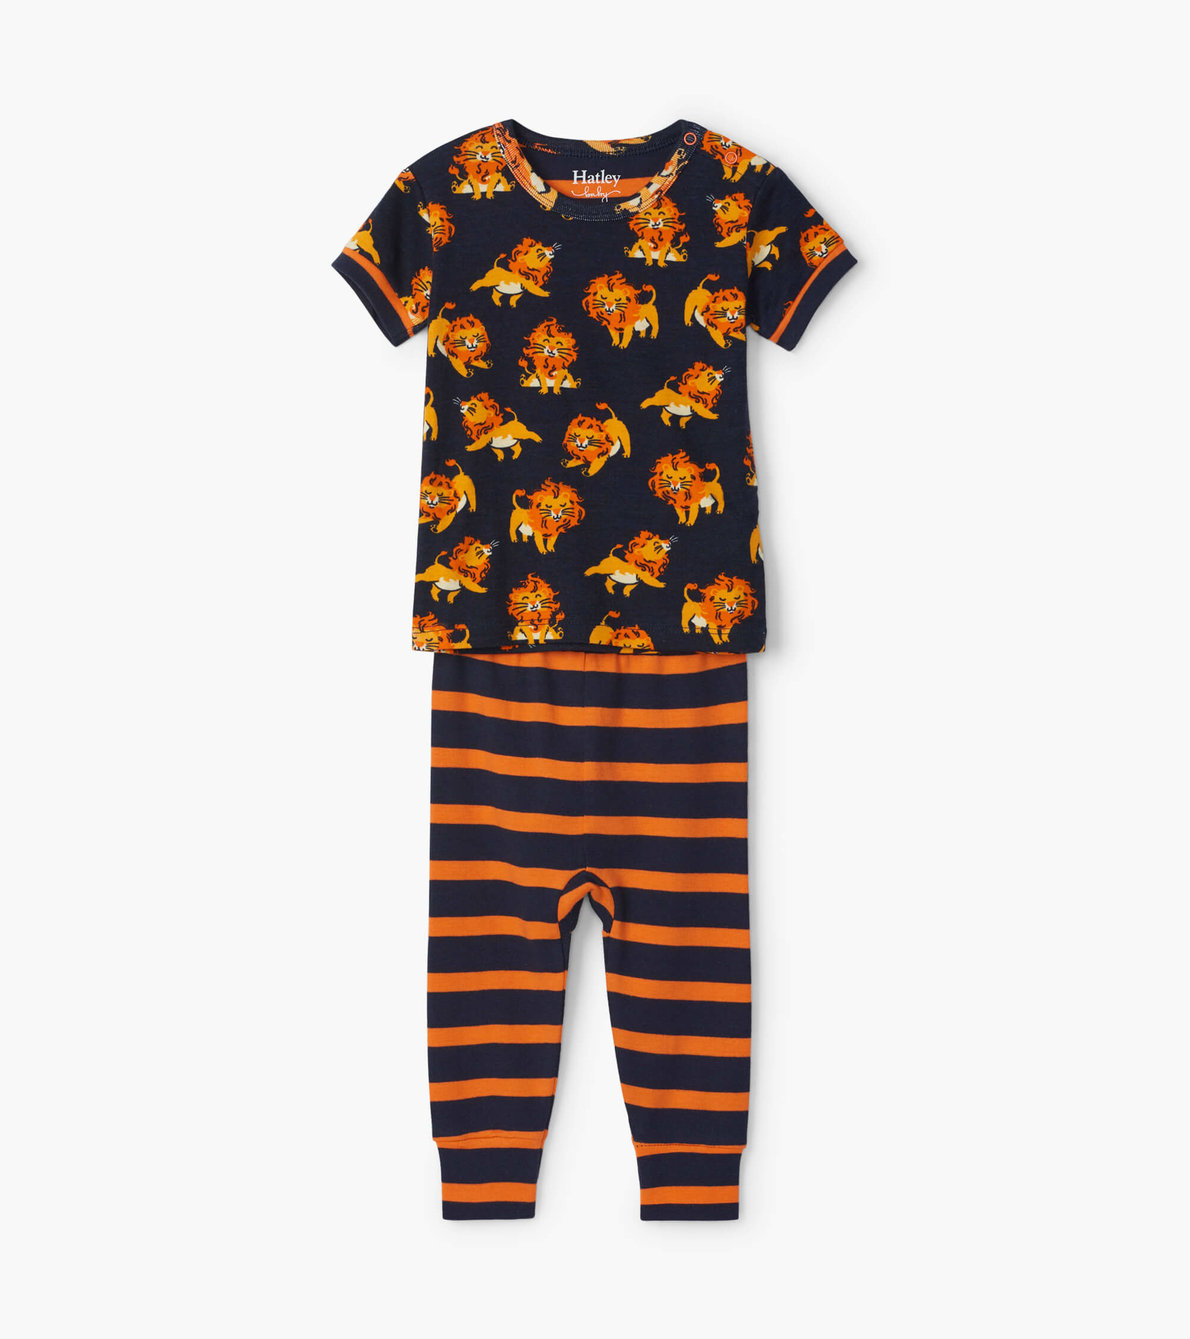 View larger image of Little Cubs Organic Cotton Baby Short Sleeve Pajama Set